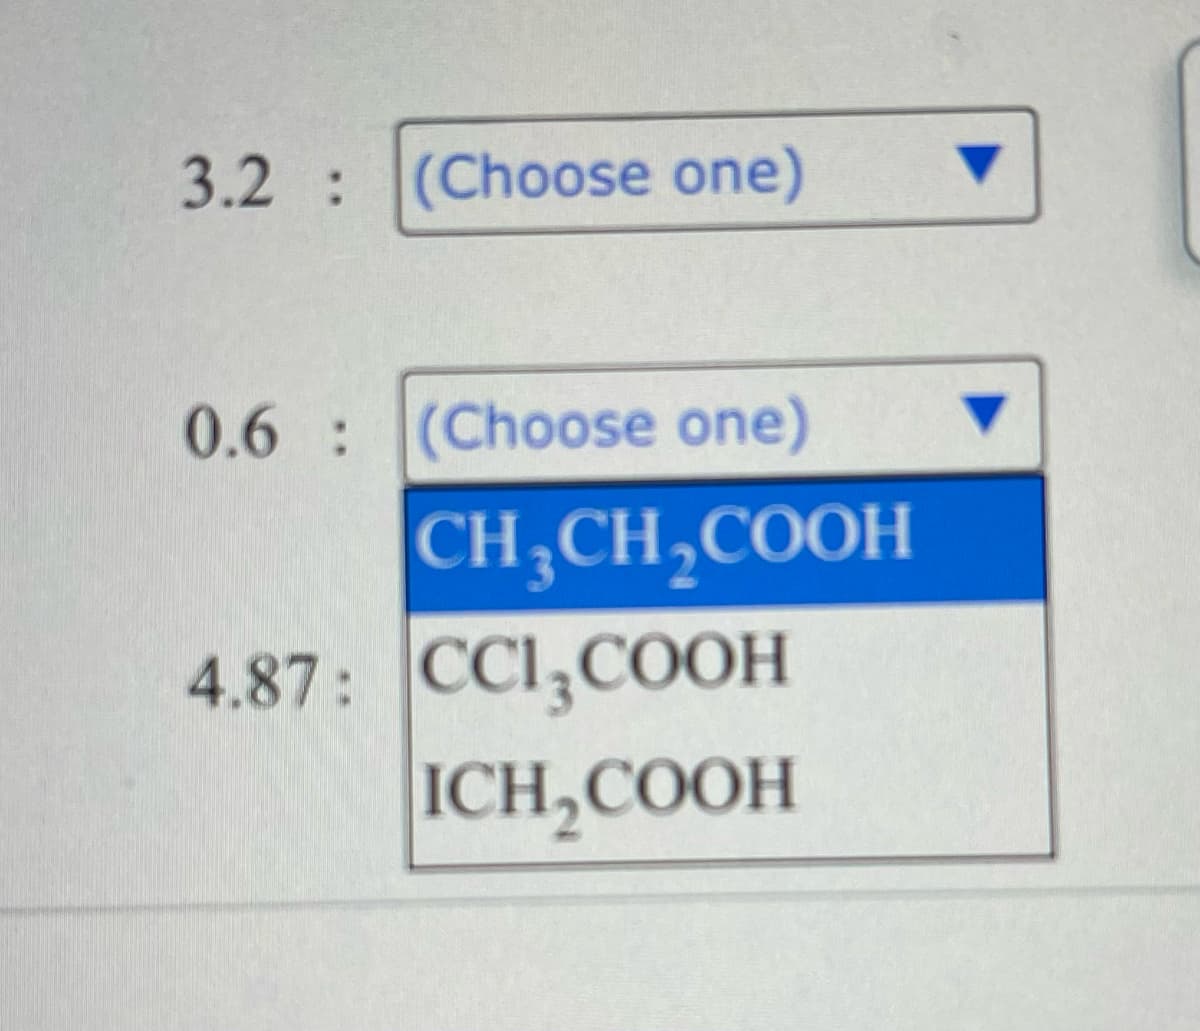 3.2 (Choose one)
:
0.6 (Choose one)
CH3CH₂COOH
4.87: CCI3COOH
ICH, COOH